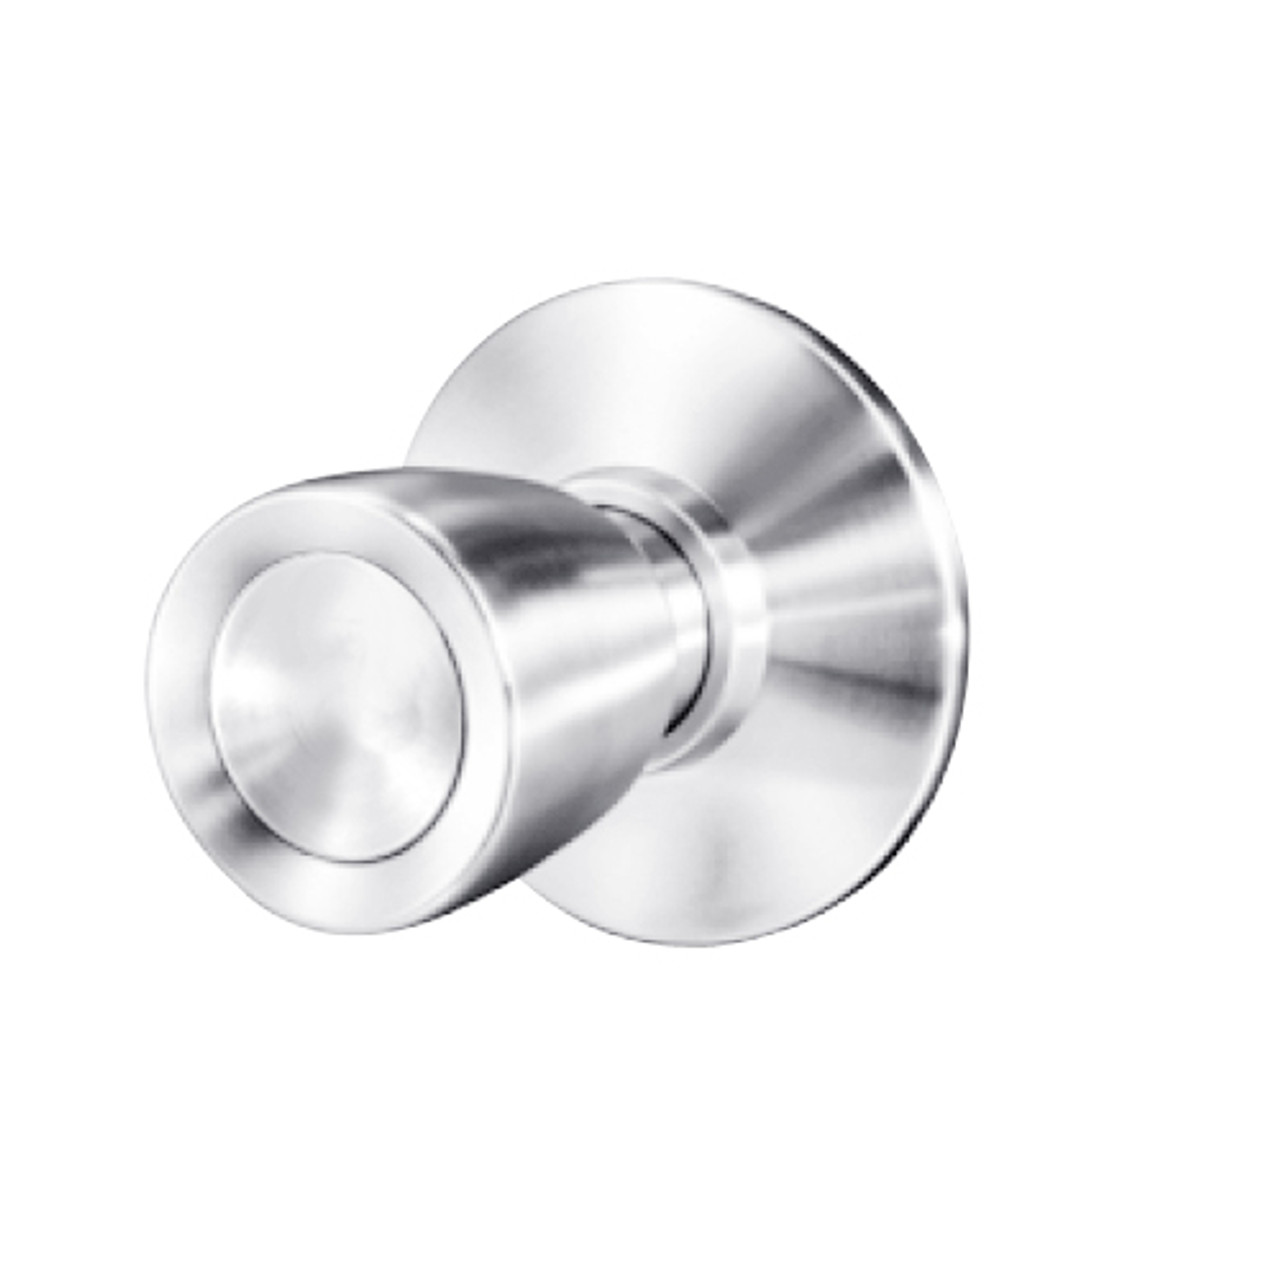 8K30N6DSTK625 Best 8K Series Passage Heavy Duty Cylindrical Knob Locks with Tulip Style in Bright Chrome